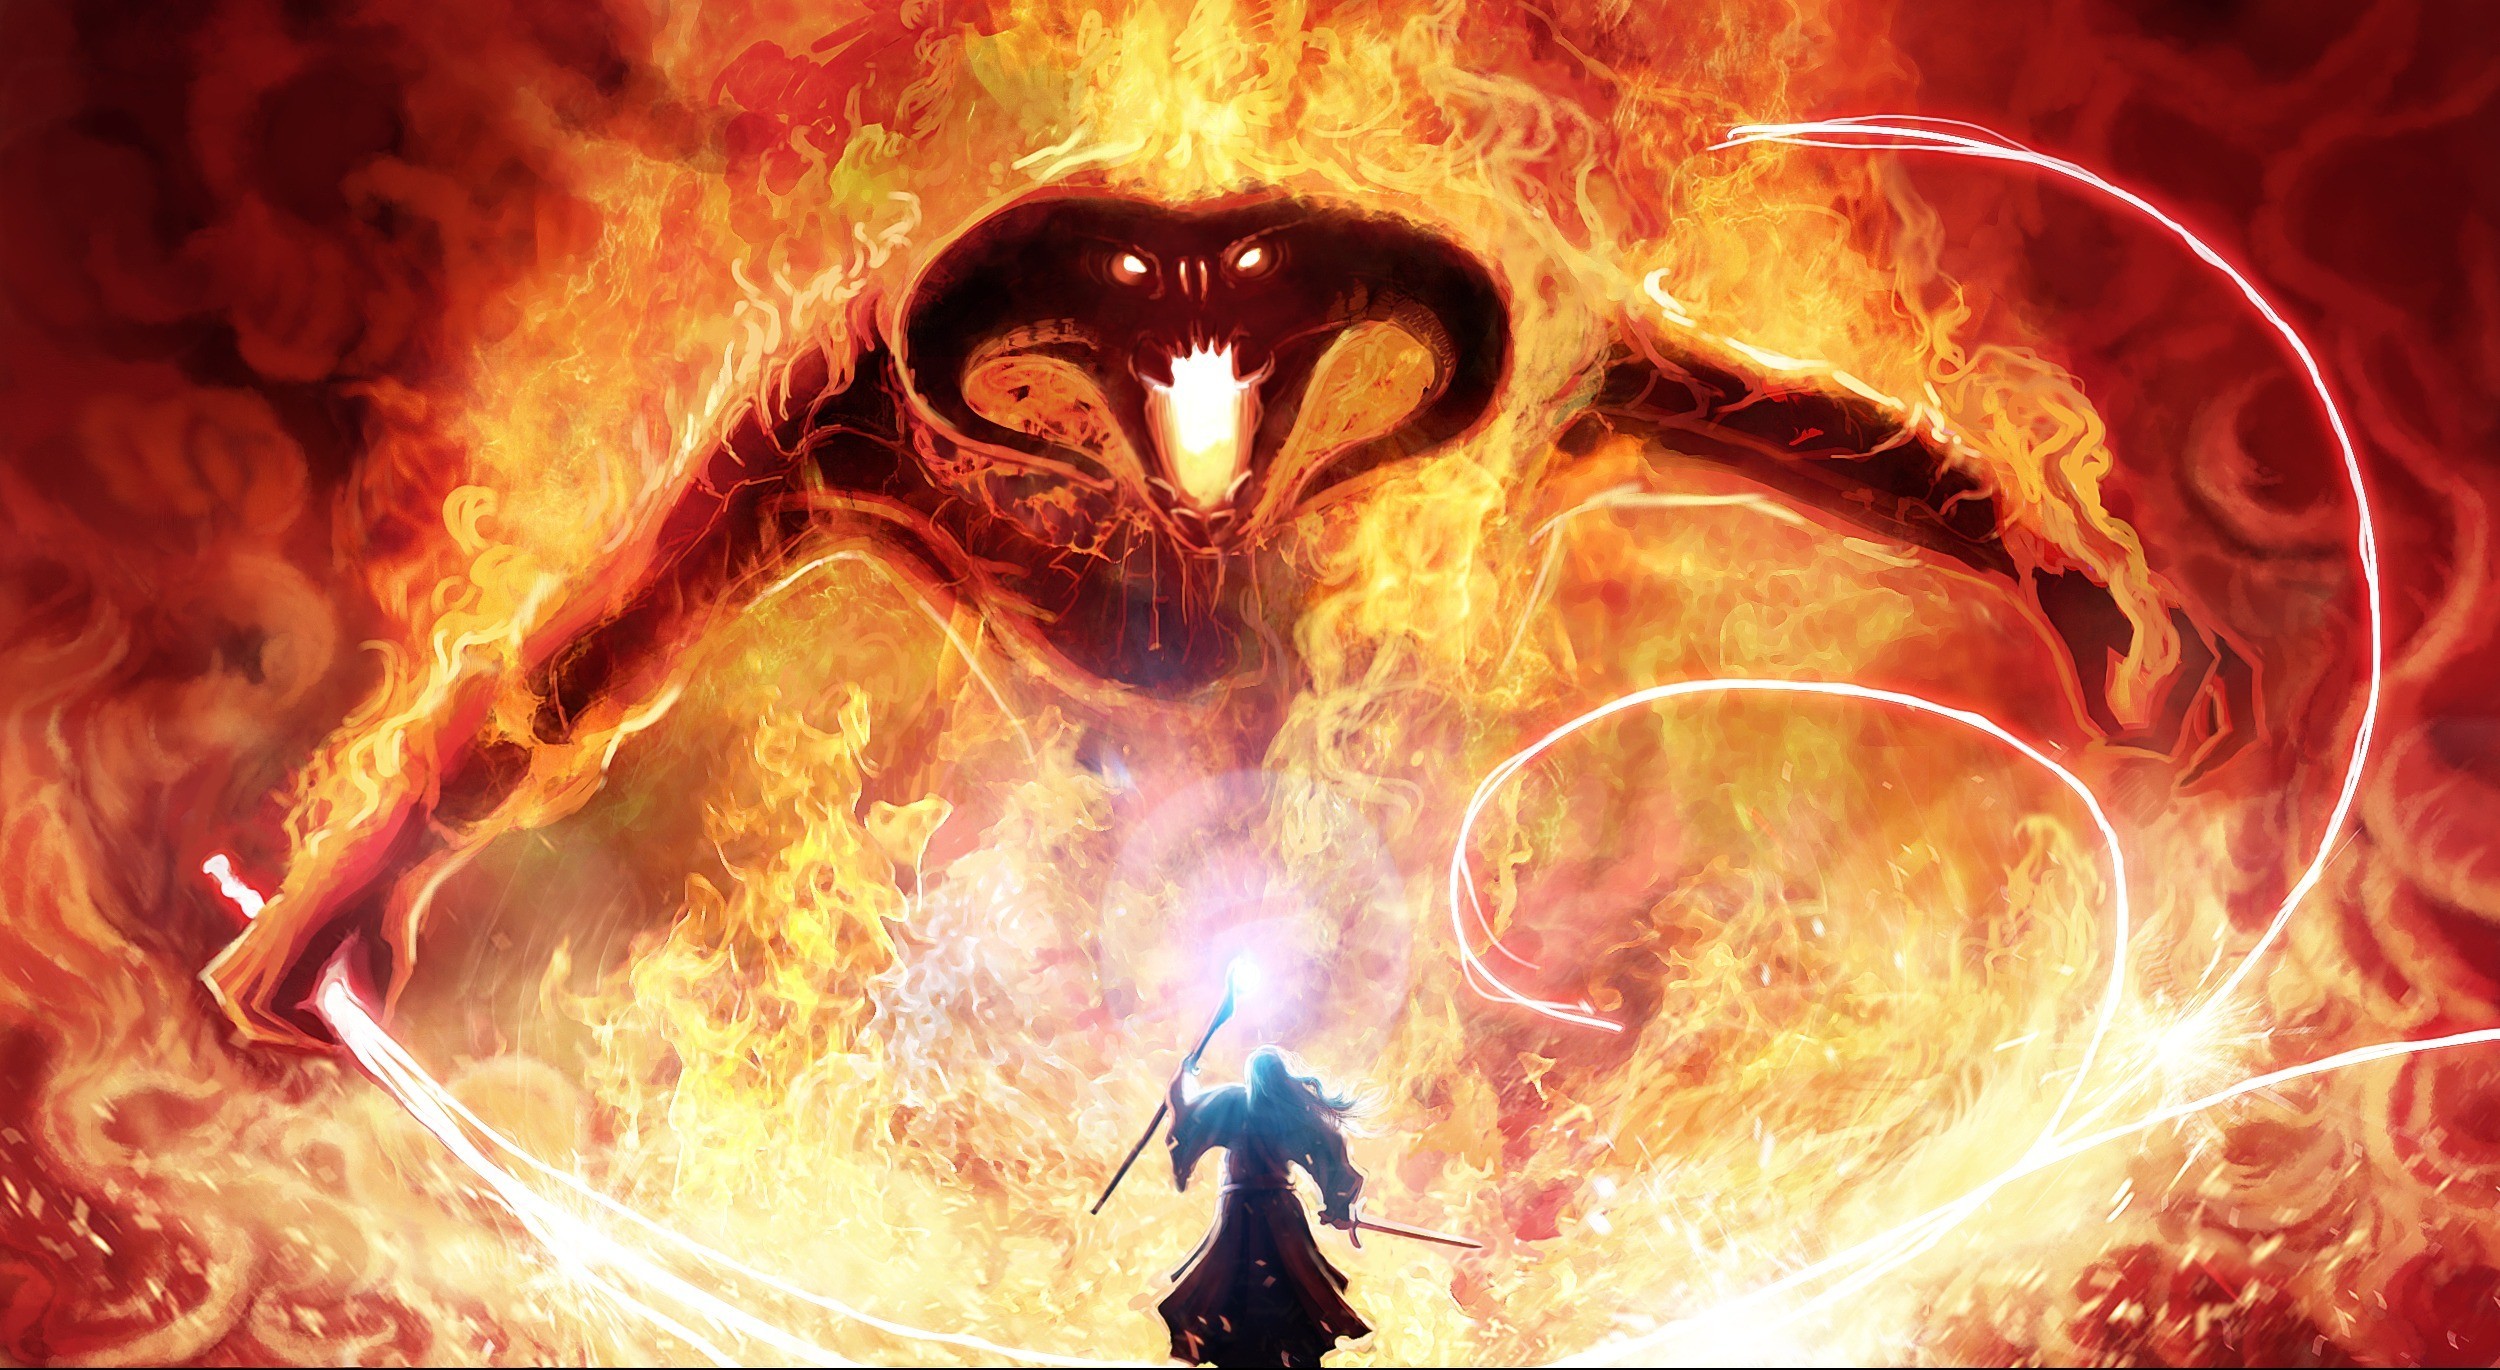 Fantasy Art The Lord Of The Rings Balrog Gandalf Moria 2500x1370